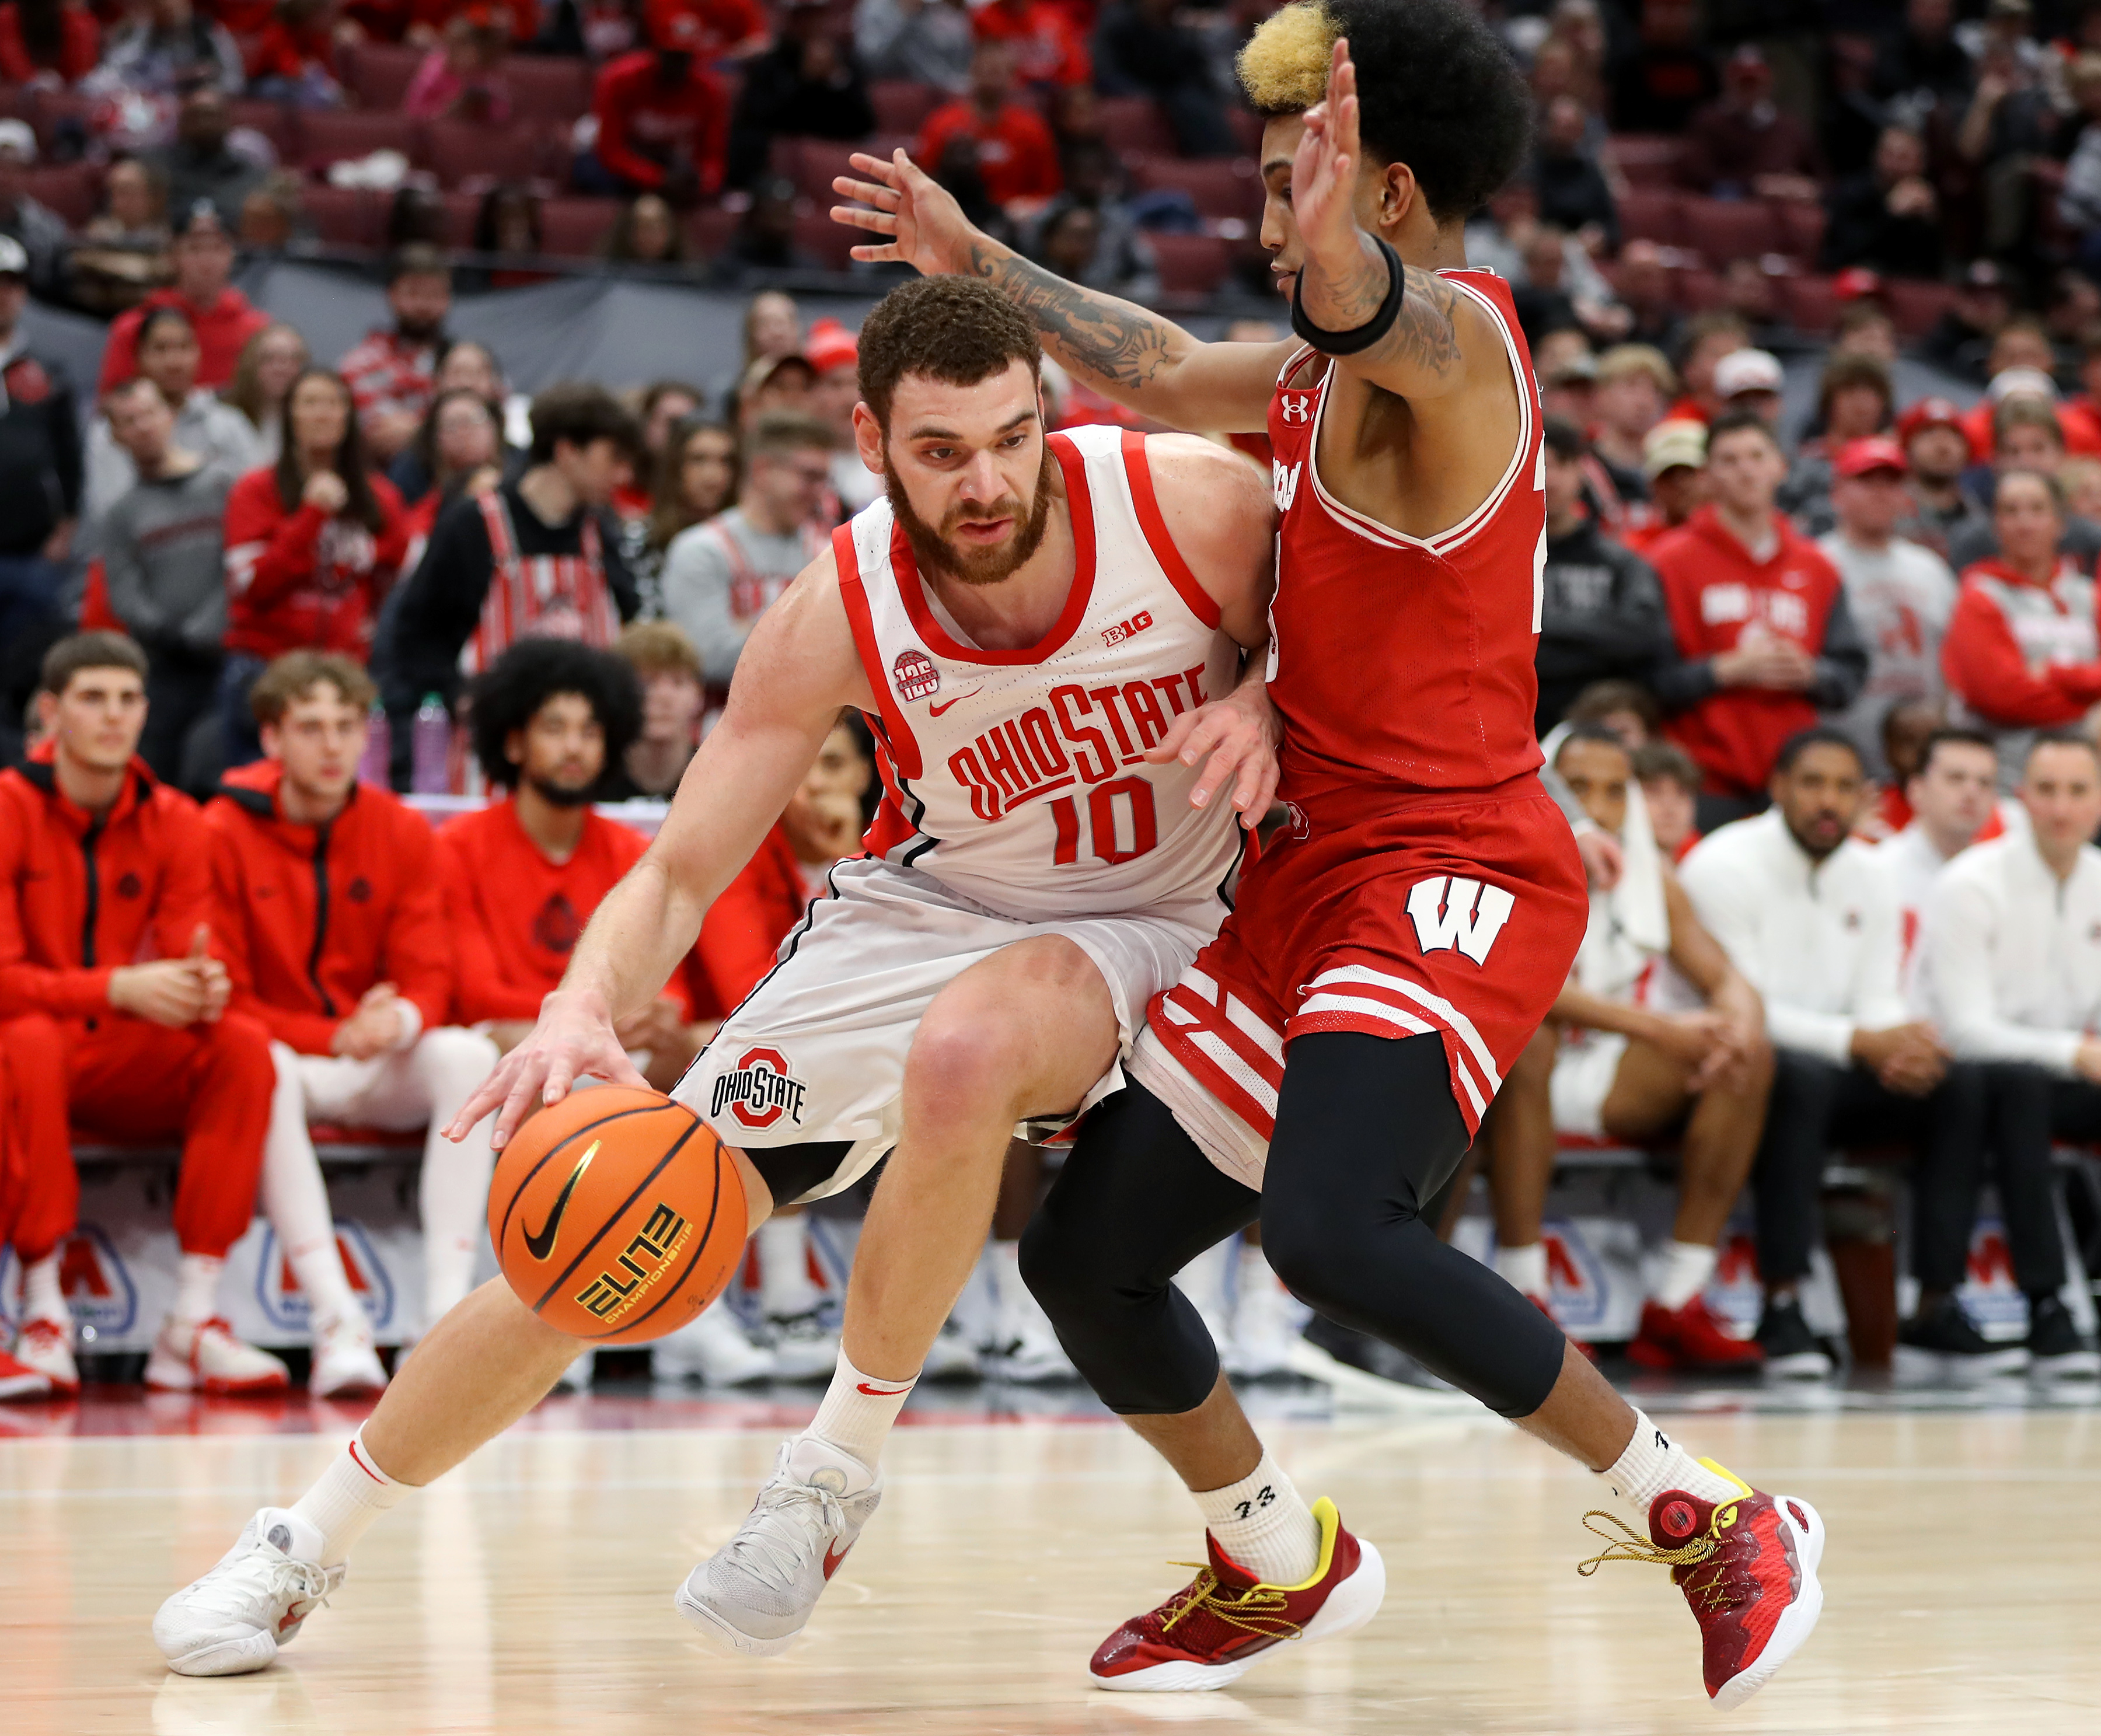 Ohio State Buckeyes forward Jamison Battle dribbles the ball as Wisconsin Badgers guard Chucky Hepburn defends during the second half at Value City Arena.